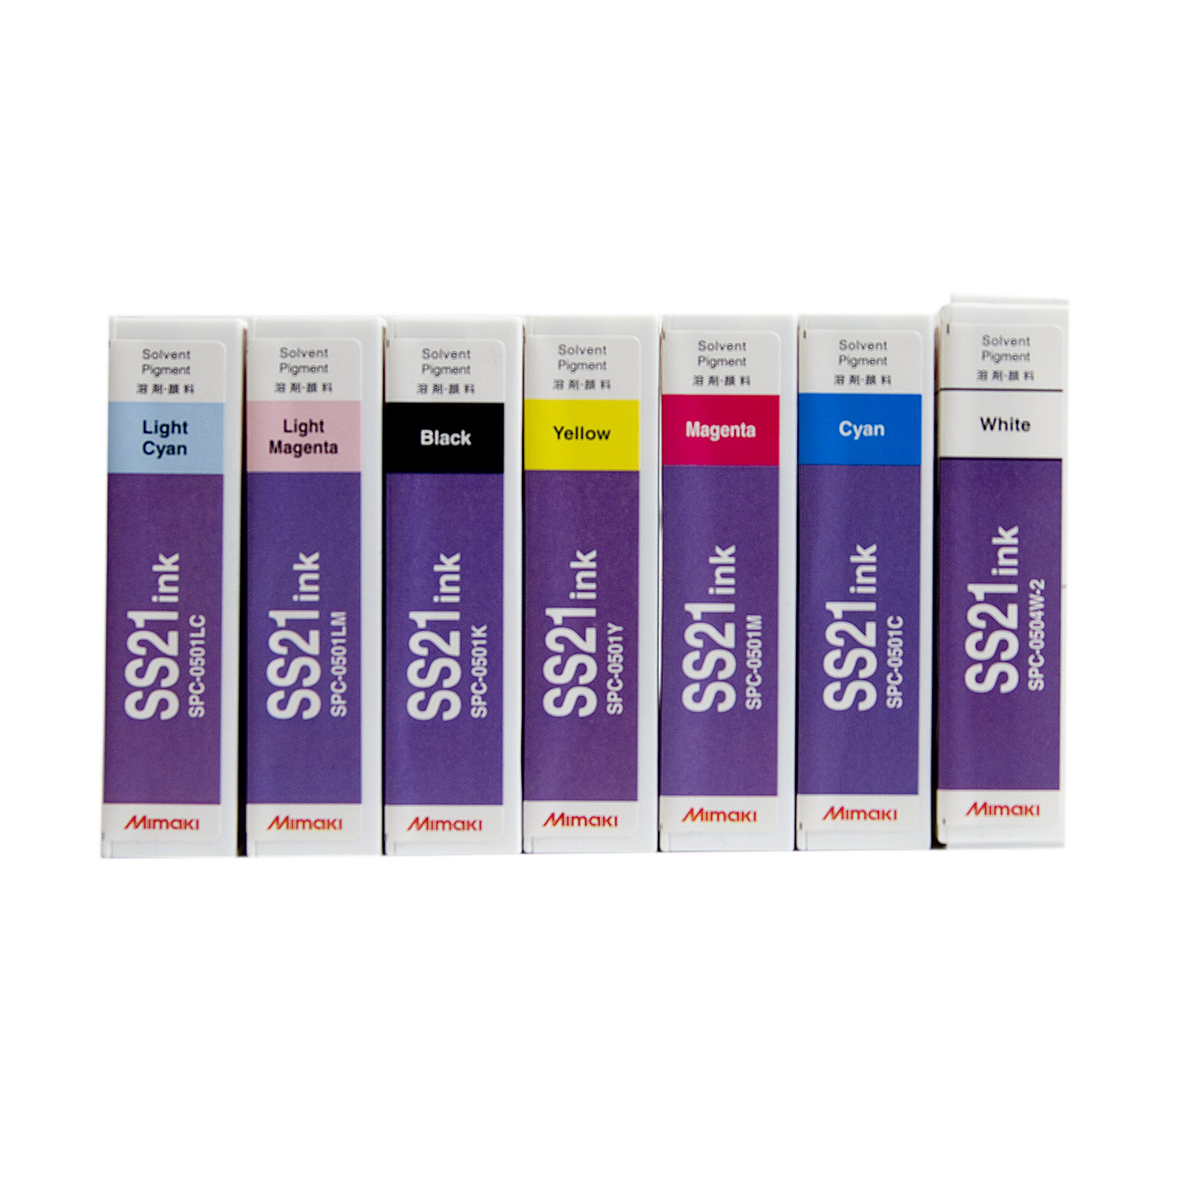 Mimaki SS21 440mL Solvent Ink Cartridges, Color: Cyan